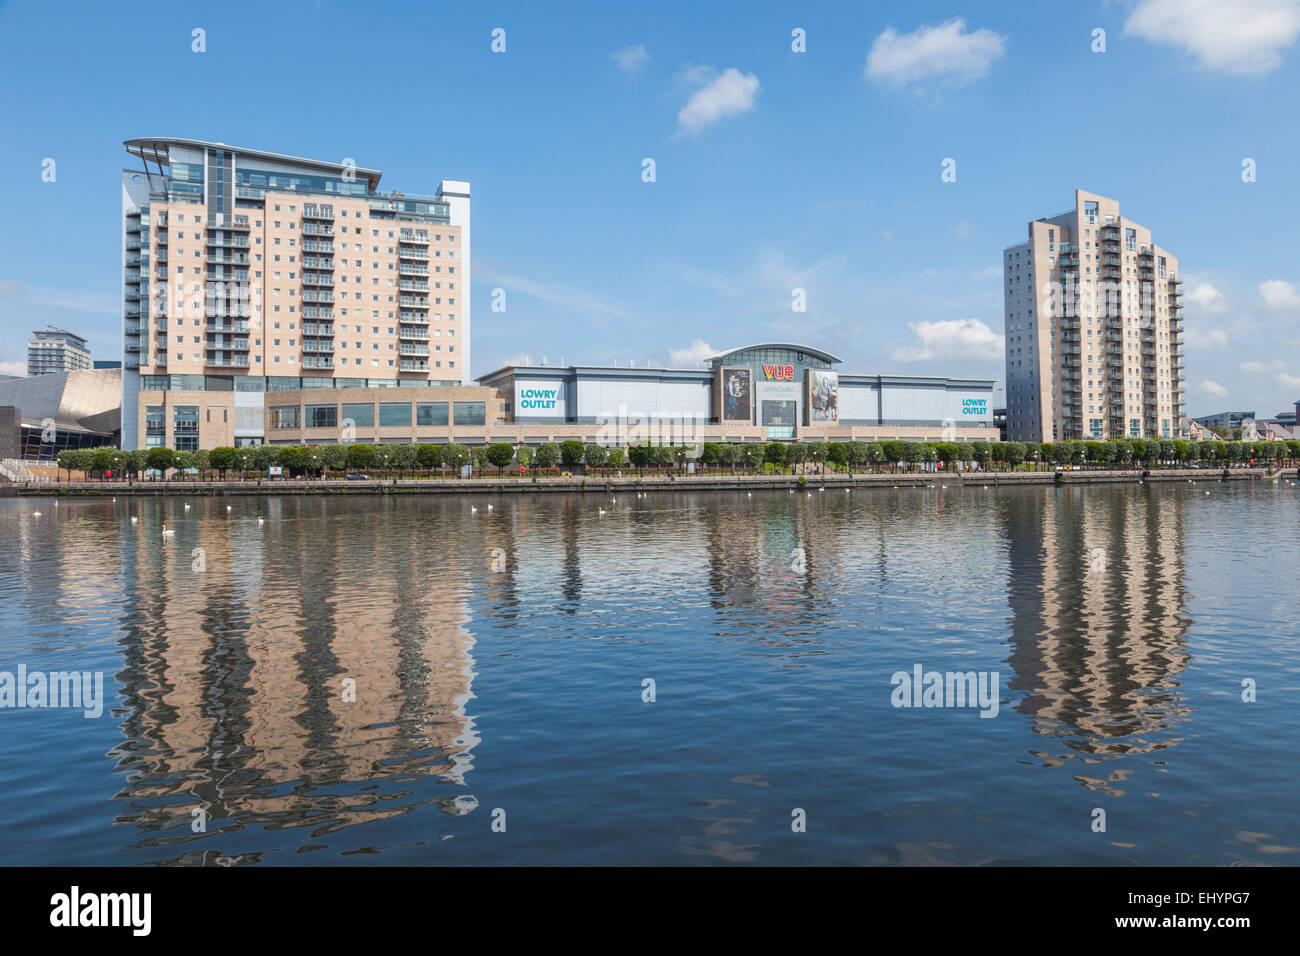 England, Manchester, city, Salford, Quays, Lowry Outlet Shopping Centre Stock Photo